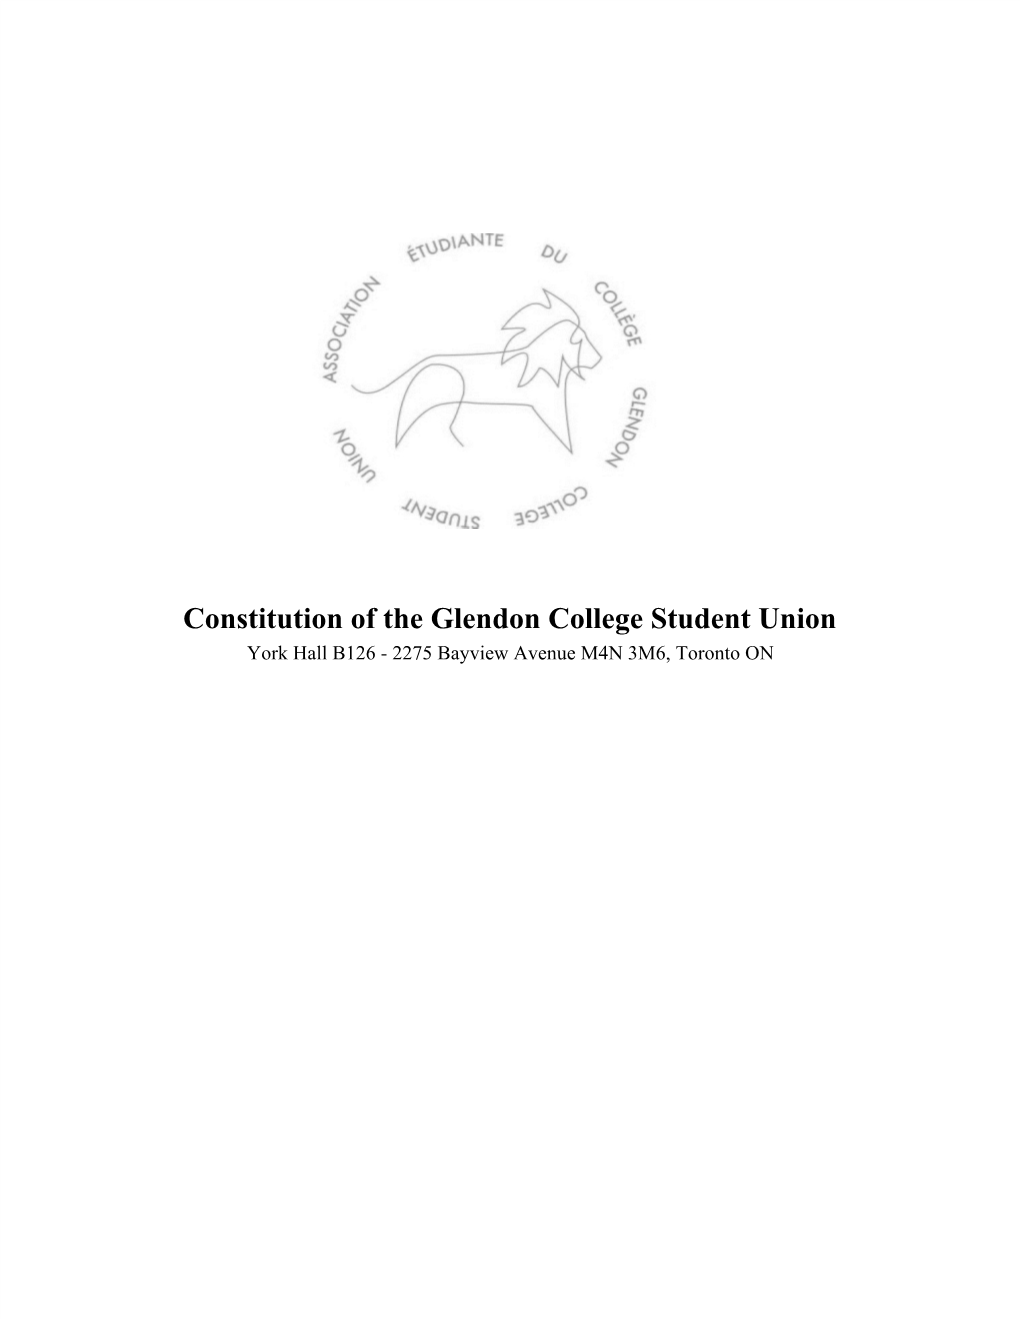 Constitution of the Glendon College Student Union York Hall B126 - 2275 Bayview Avenue M4N 3M6, Toronto ON